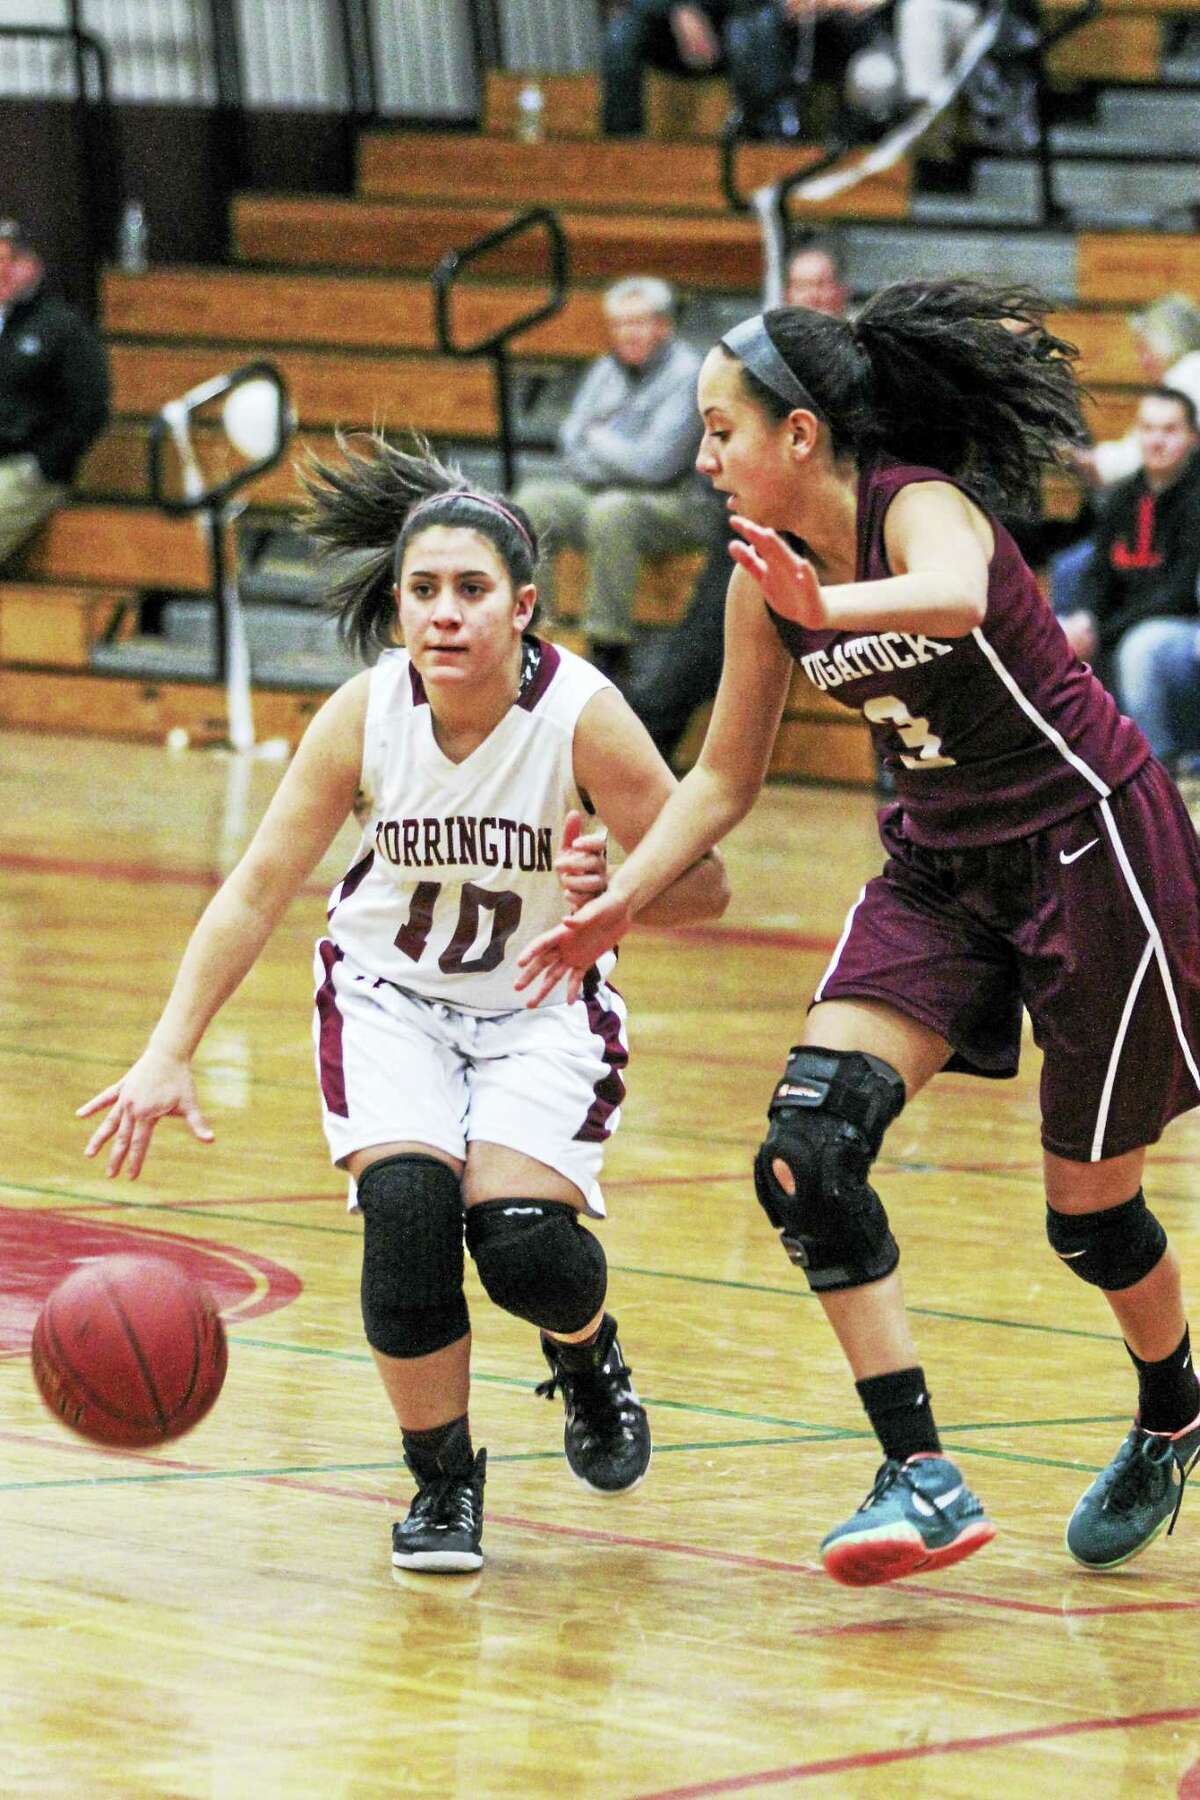 Alexis Tyrrell, guarded here by Naugatuck’s Alyana Sosa, had a game-high 14 points for Torrington Tuesday night.